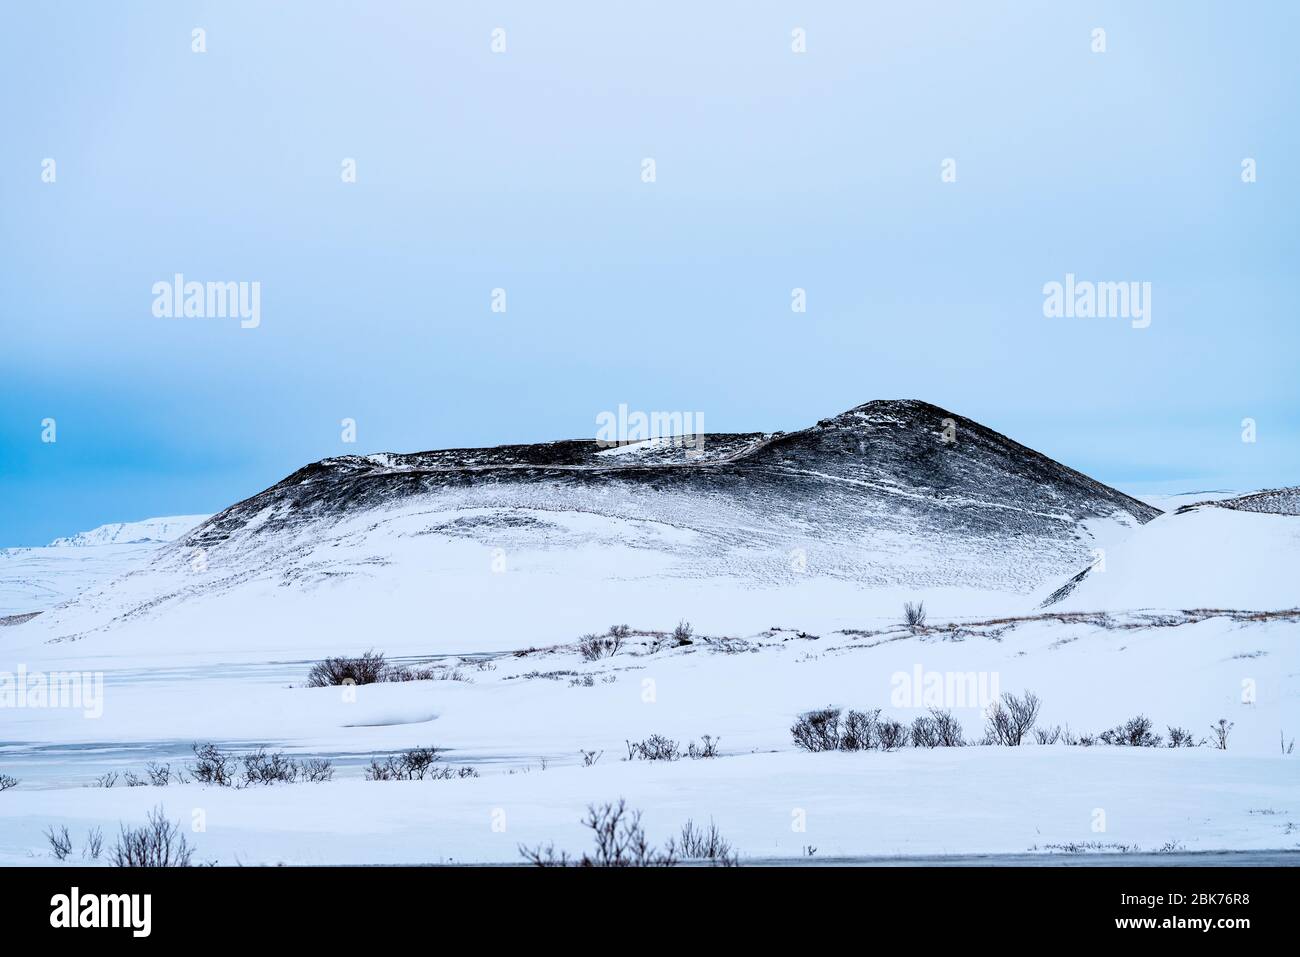 Single dramatic symetrical volcanic,snow covered crater near lake Myvatn, Iceland in mid winter, against a blue sky Stock Photo